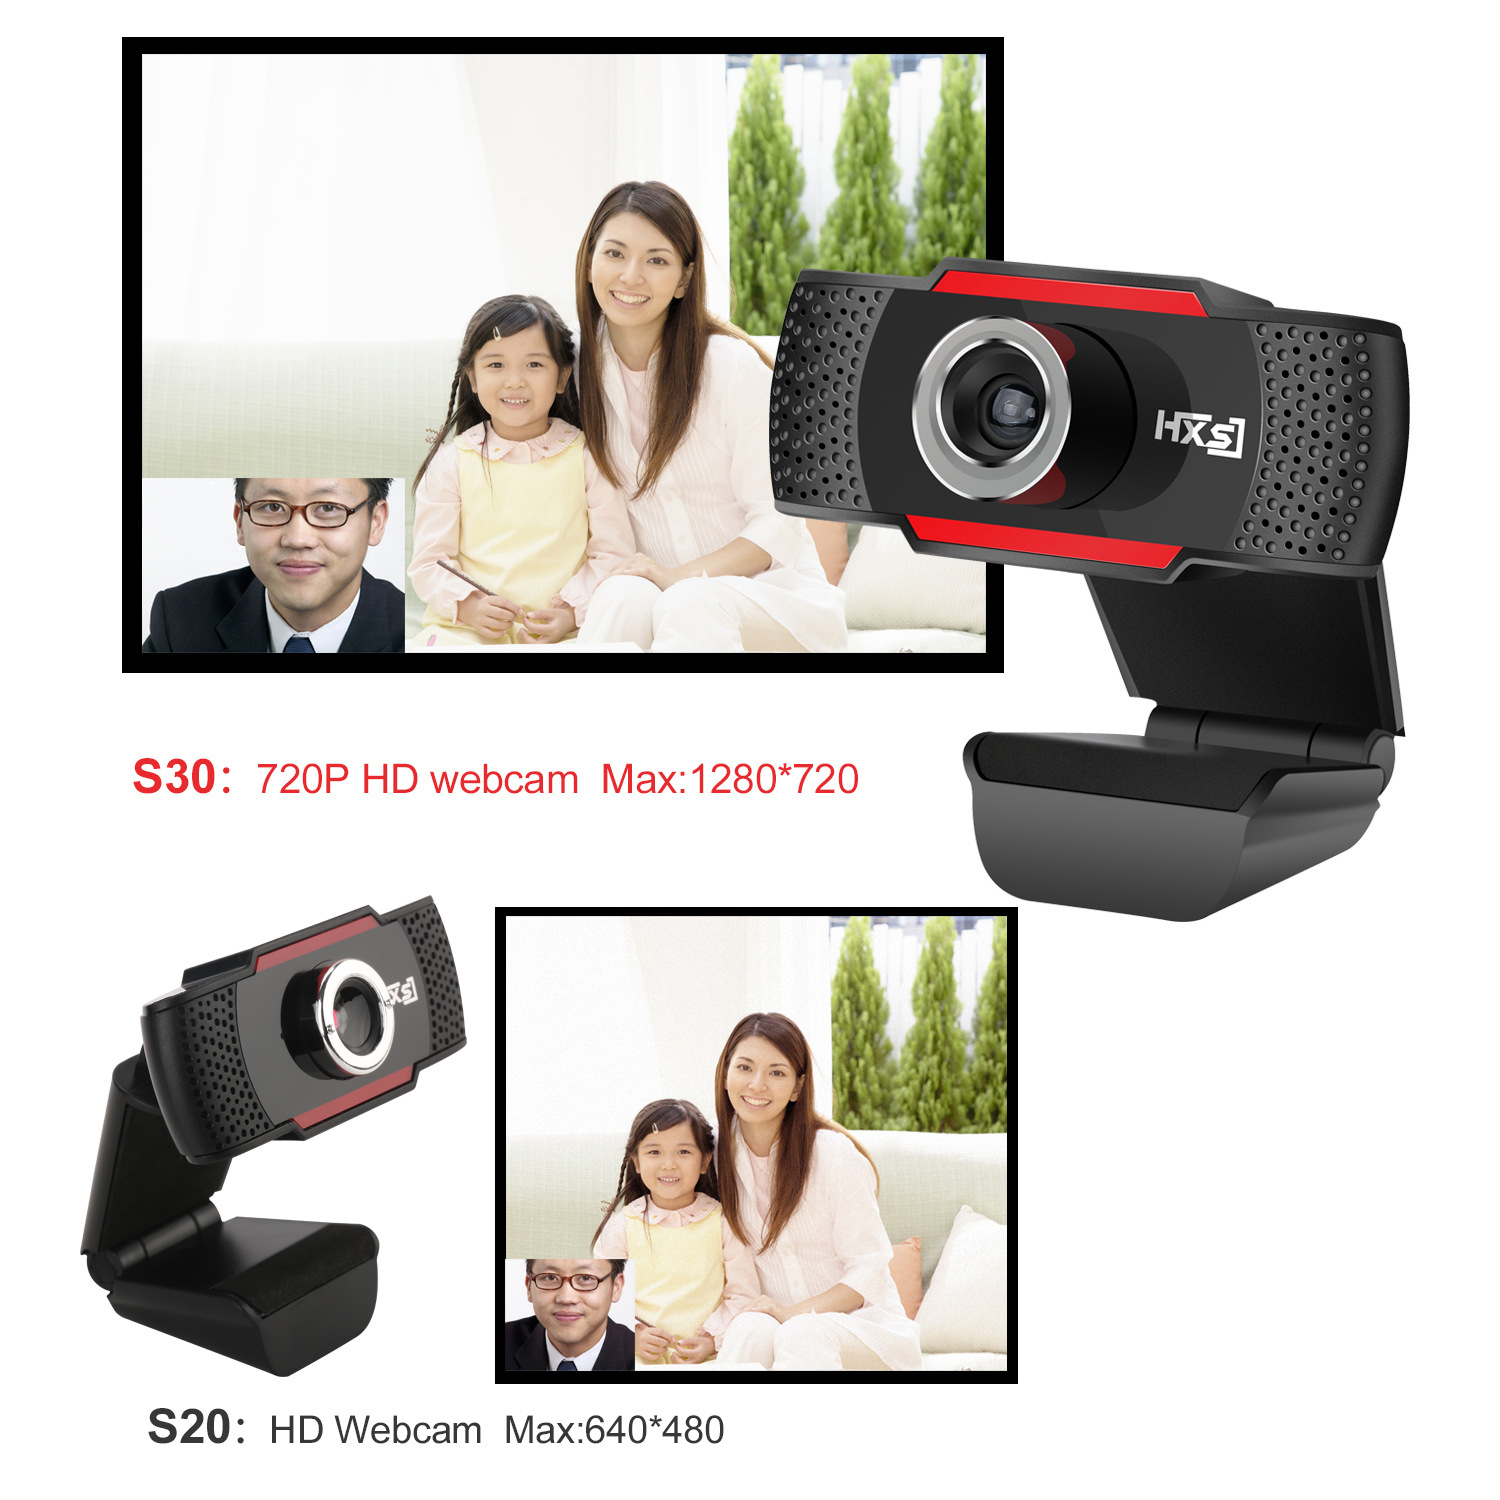 A870 USB Webcam,Web Camera,Web cam Desktop camera With Built-in MIC for Video Calling and Recording 8